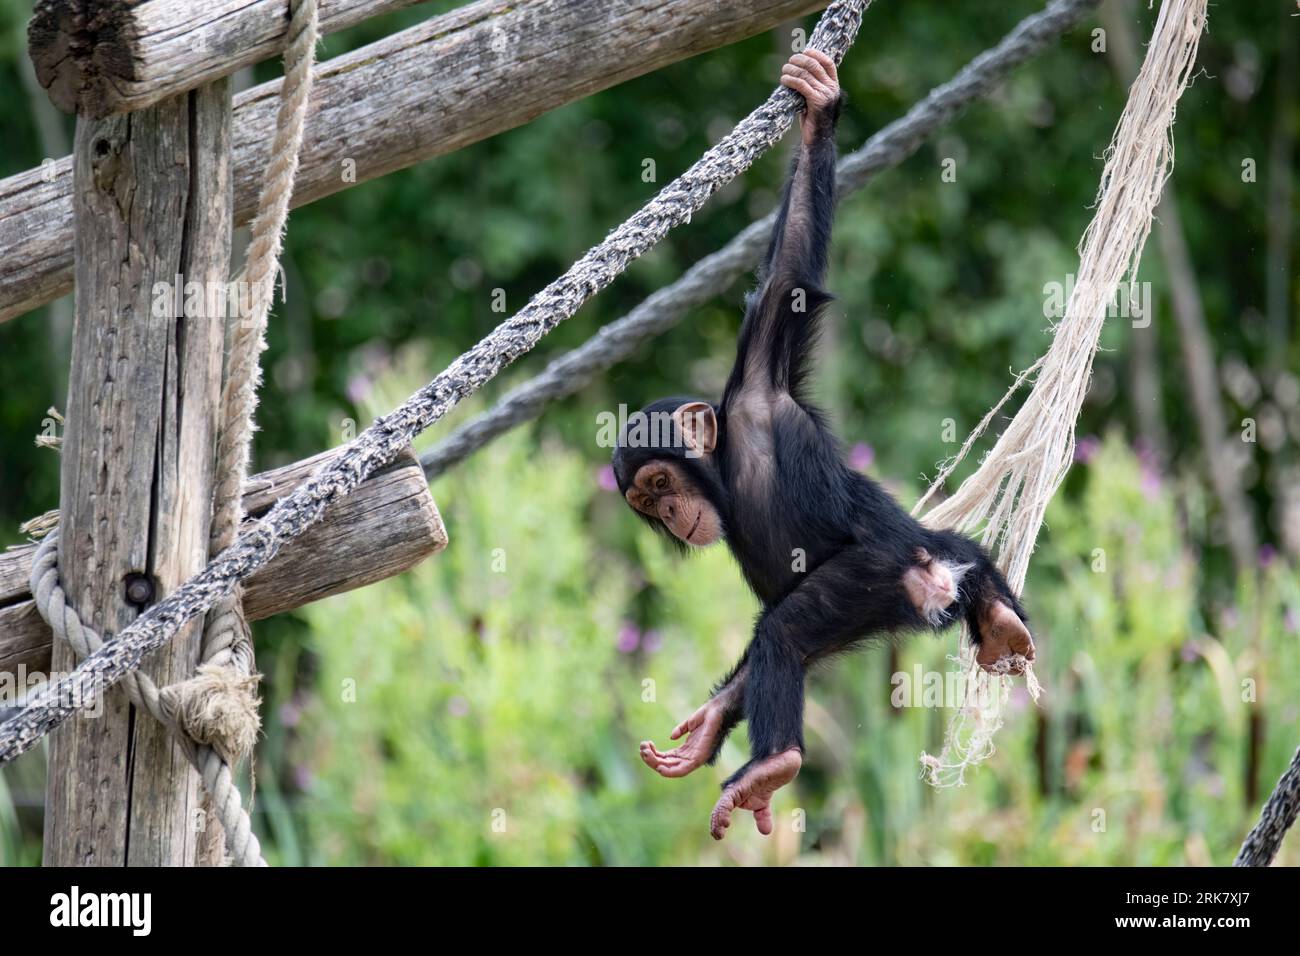 A brown monkey is perched on a tree branch, gripping onto a white rope suspended from the tree in an outdoor zoo enclosure Stock Photo